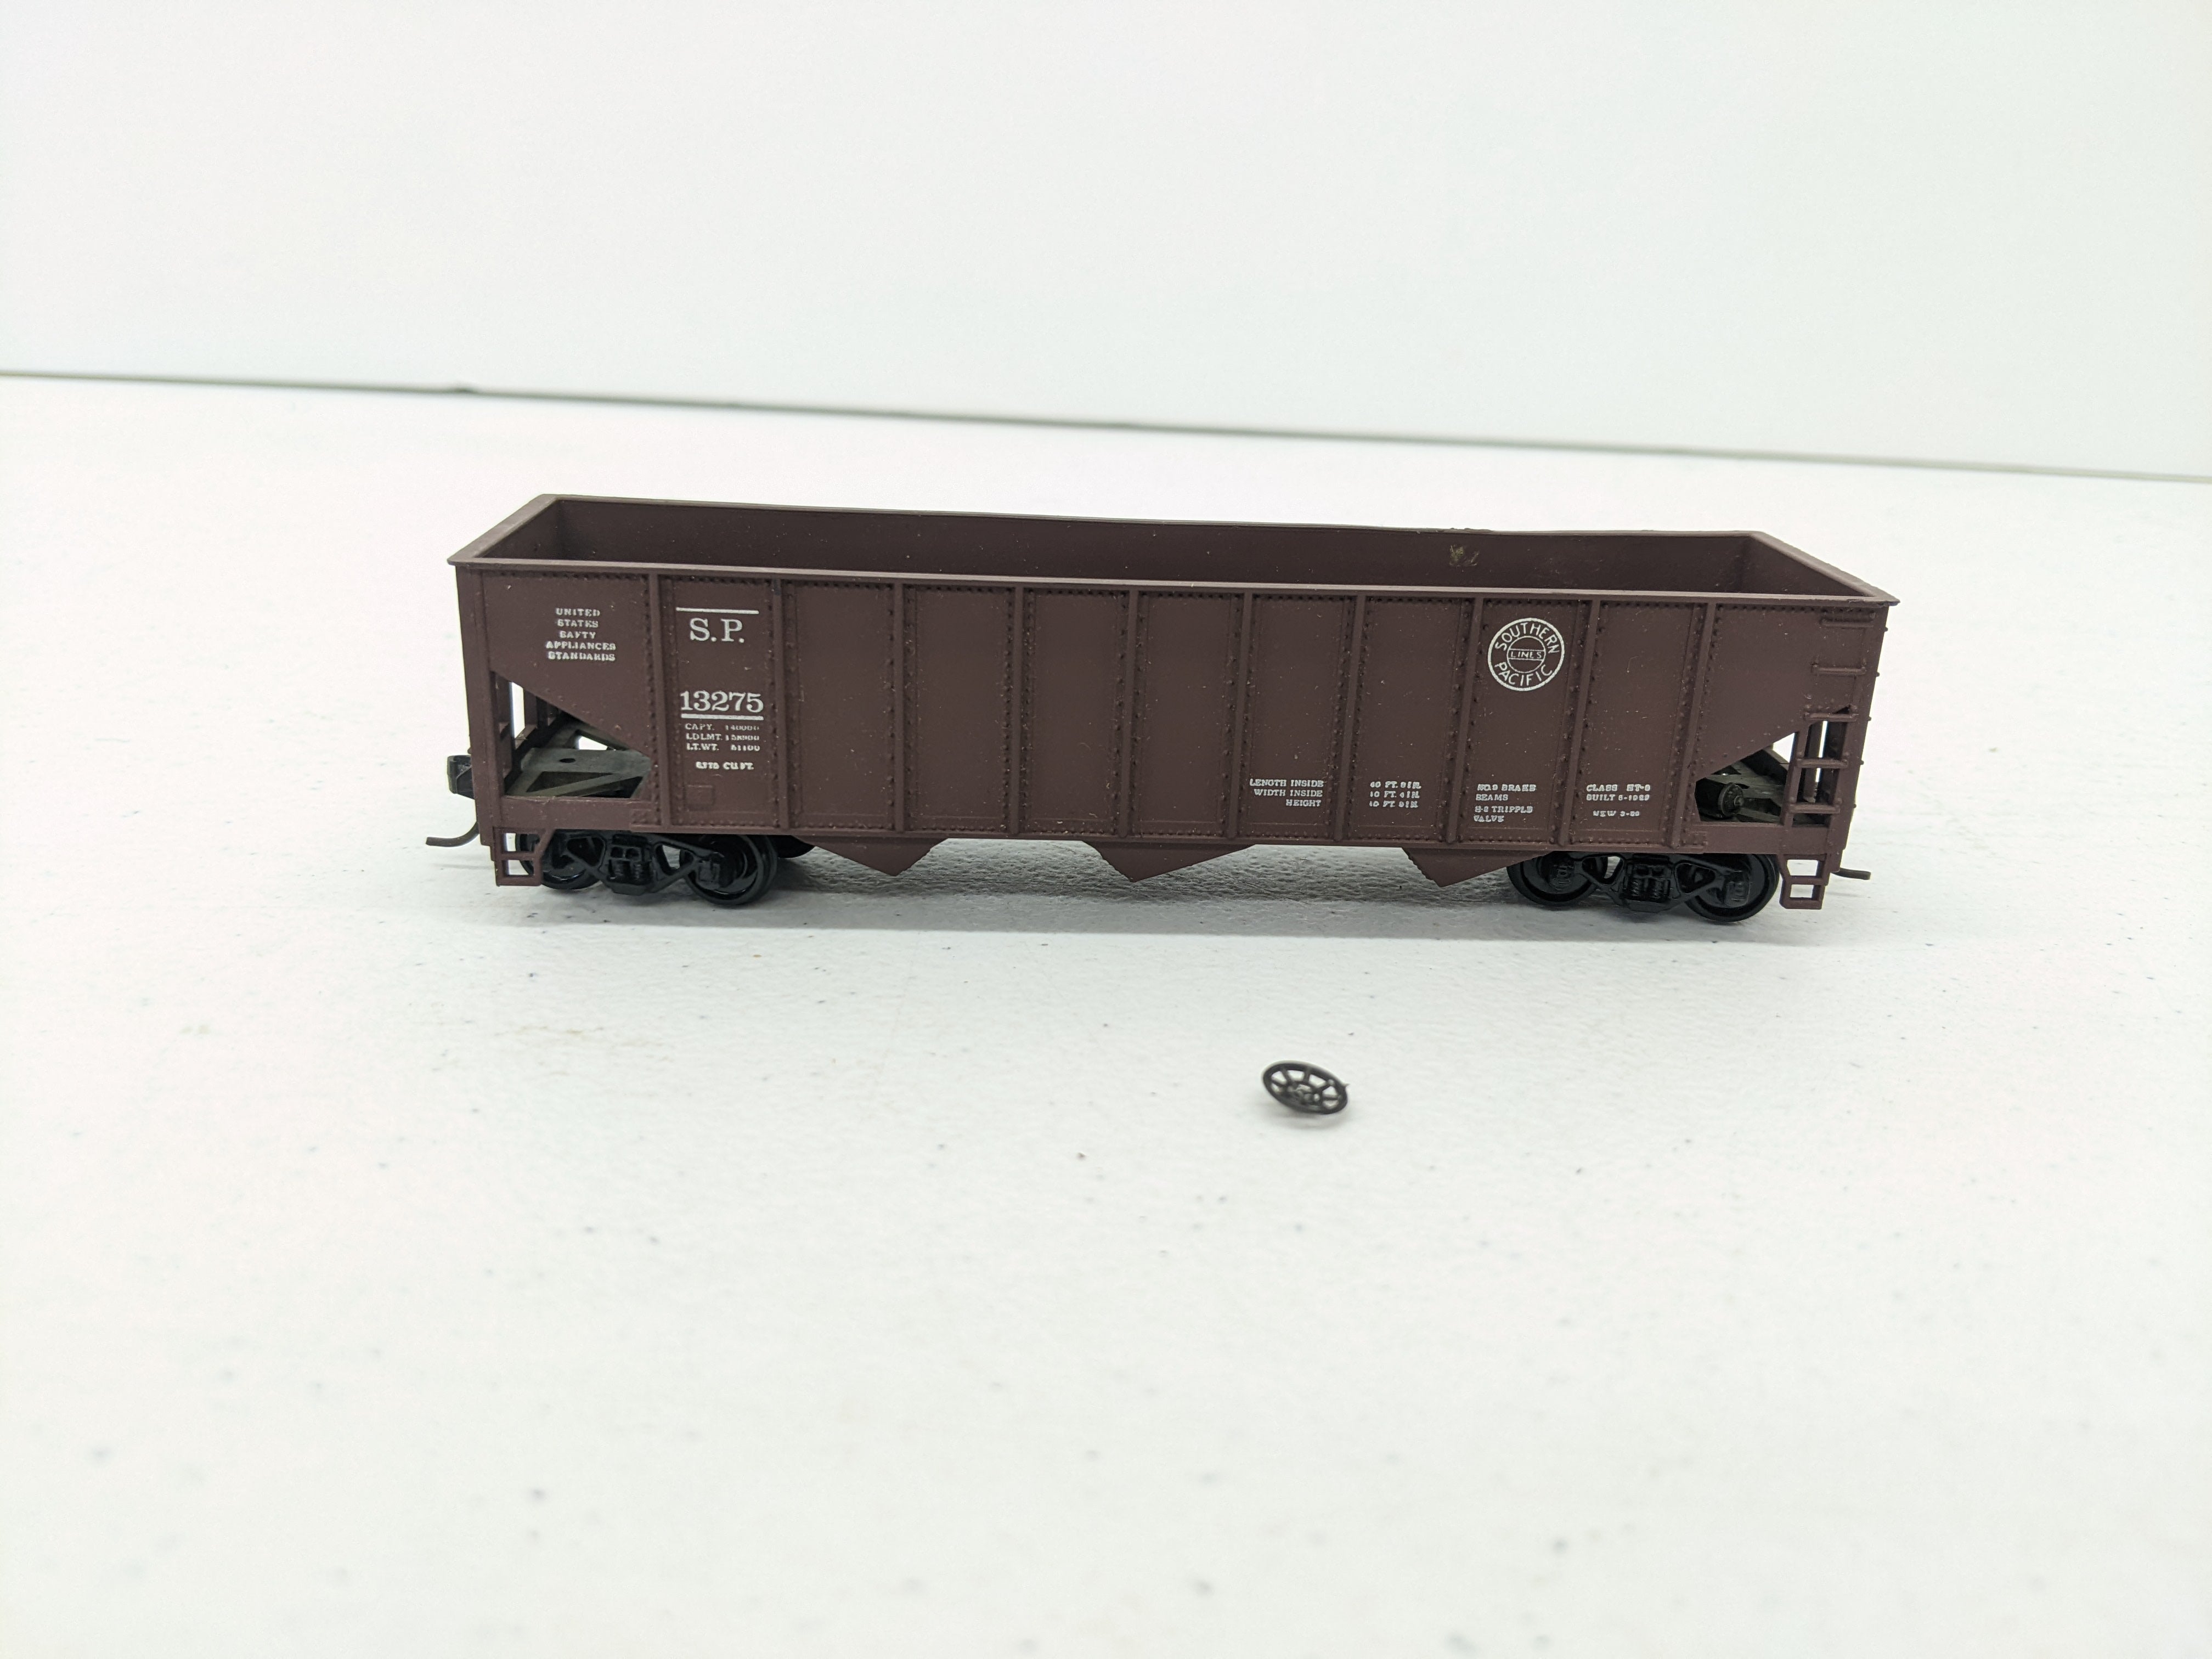 USED Roundhouse HO Scale, 3 Bay Open Hopper, Southern Pacific SP #13275